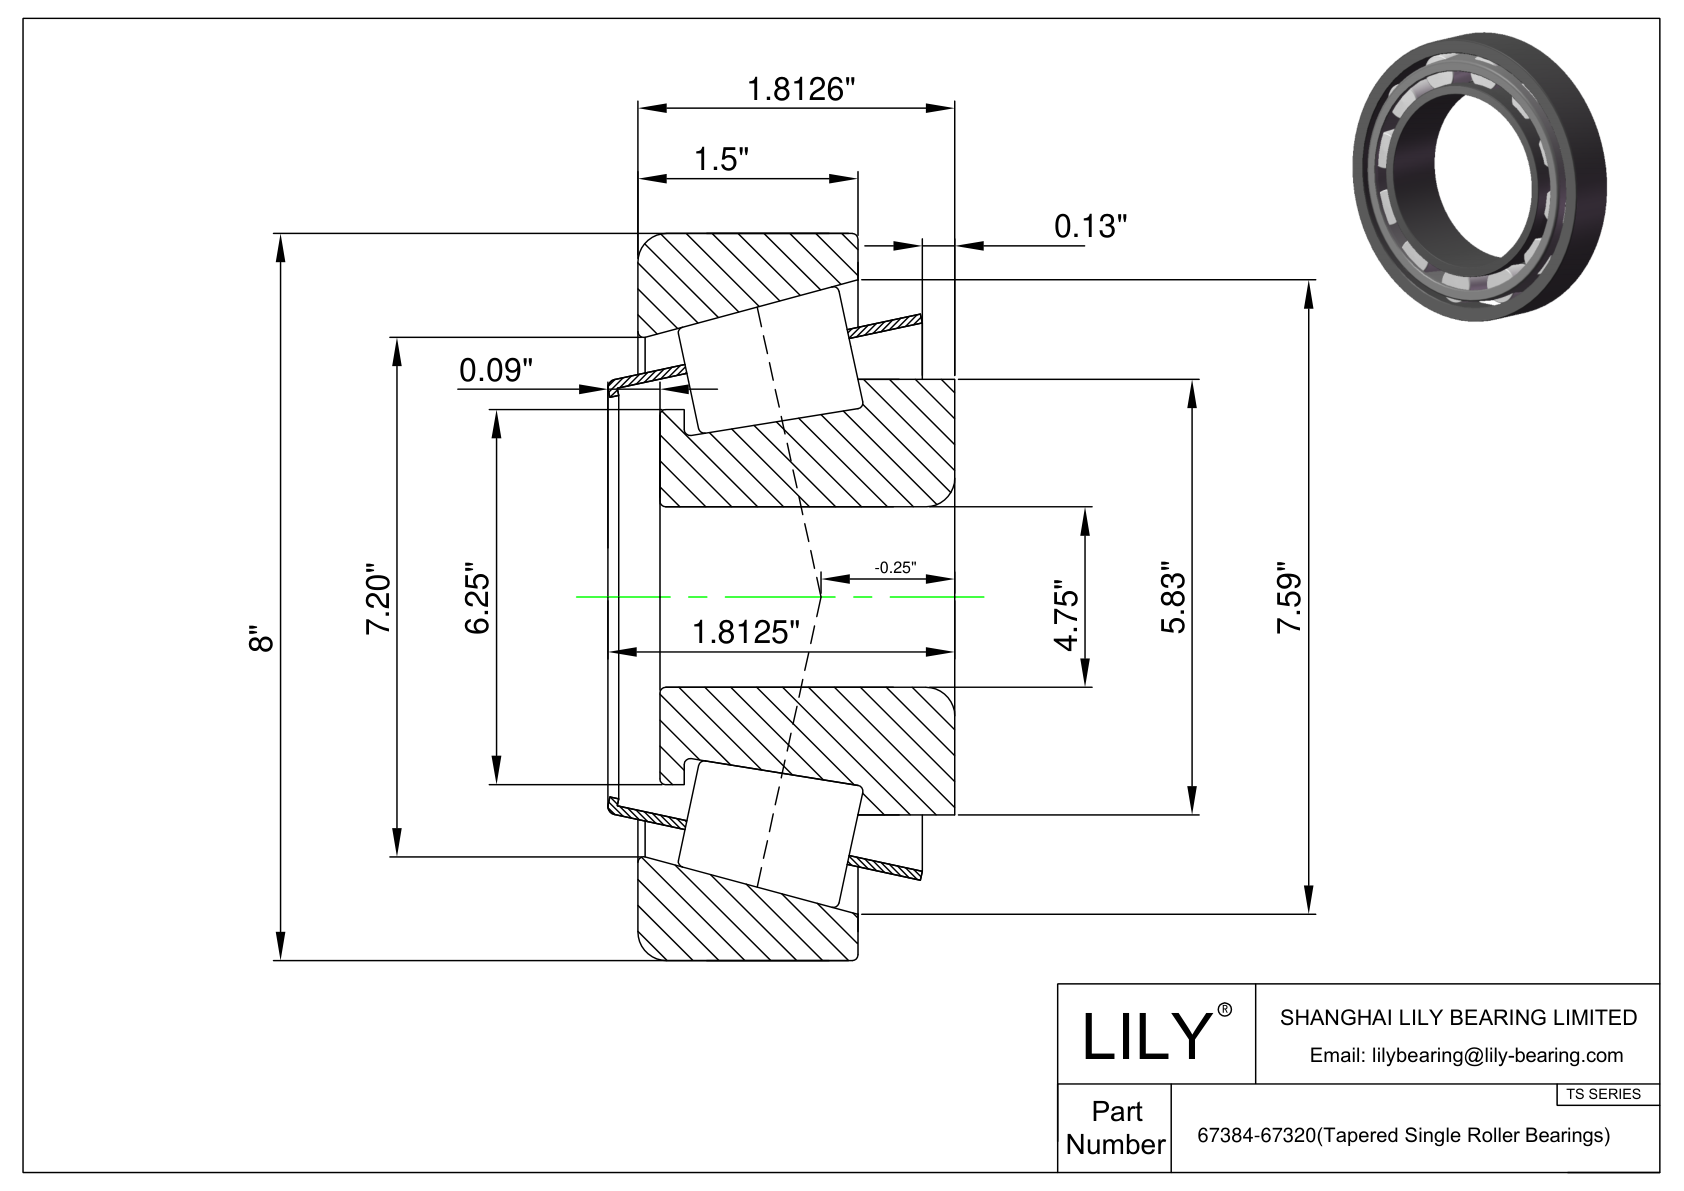 67384-67320 TS (Tapered Single Roller Bearings) (Imperial) cad drawing